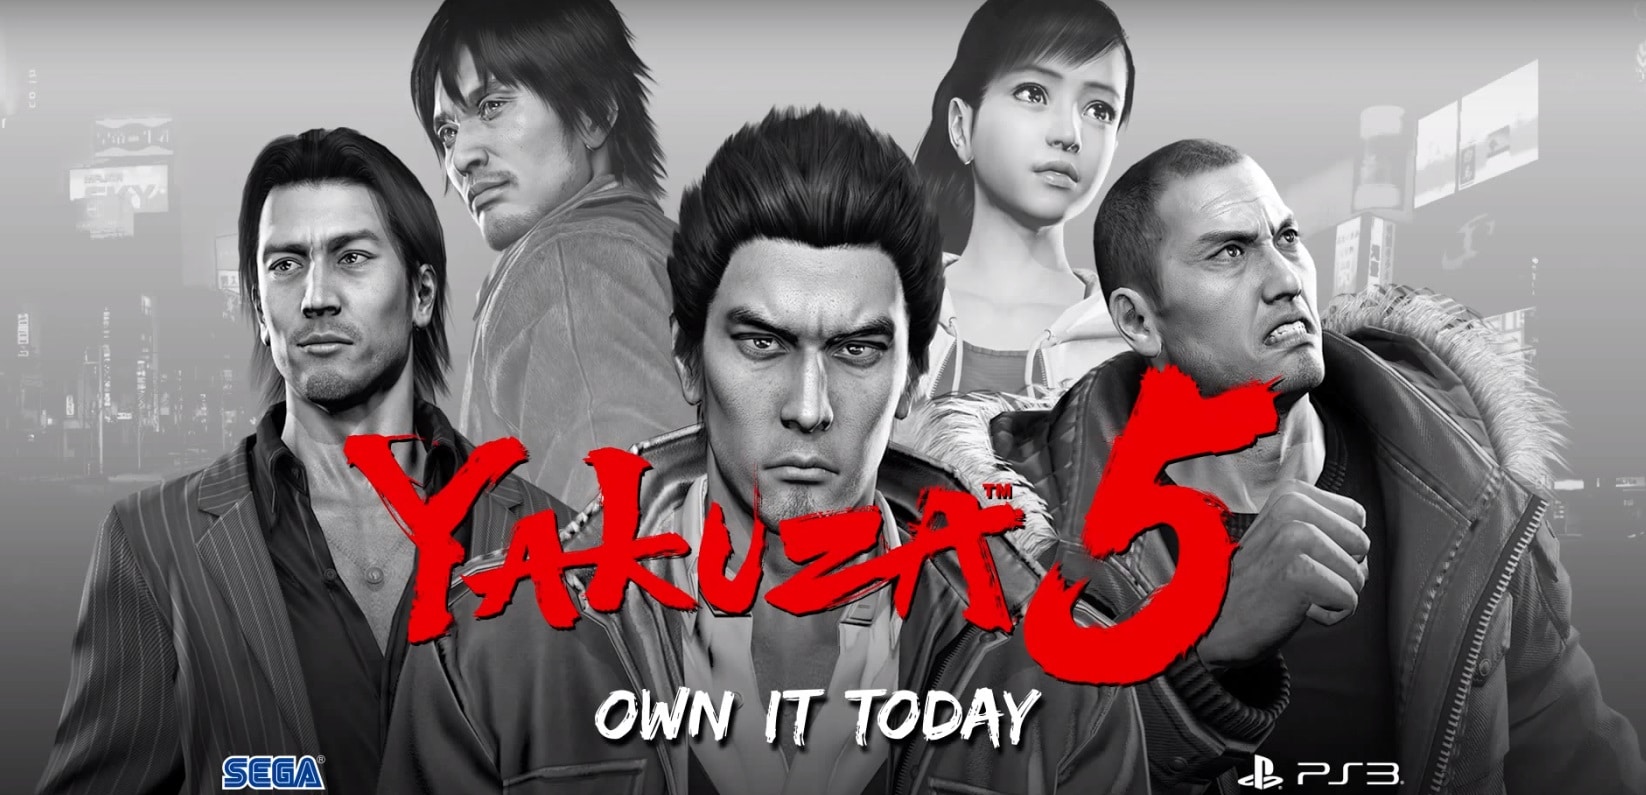 Yakuza 5 Releases On PS3 Out Now USA $40 Dollars Artwork Official